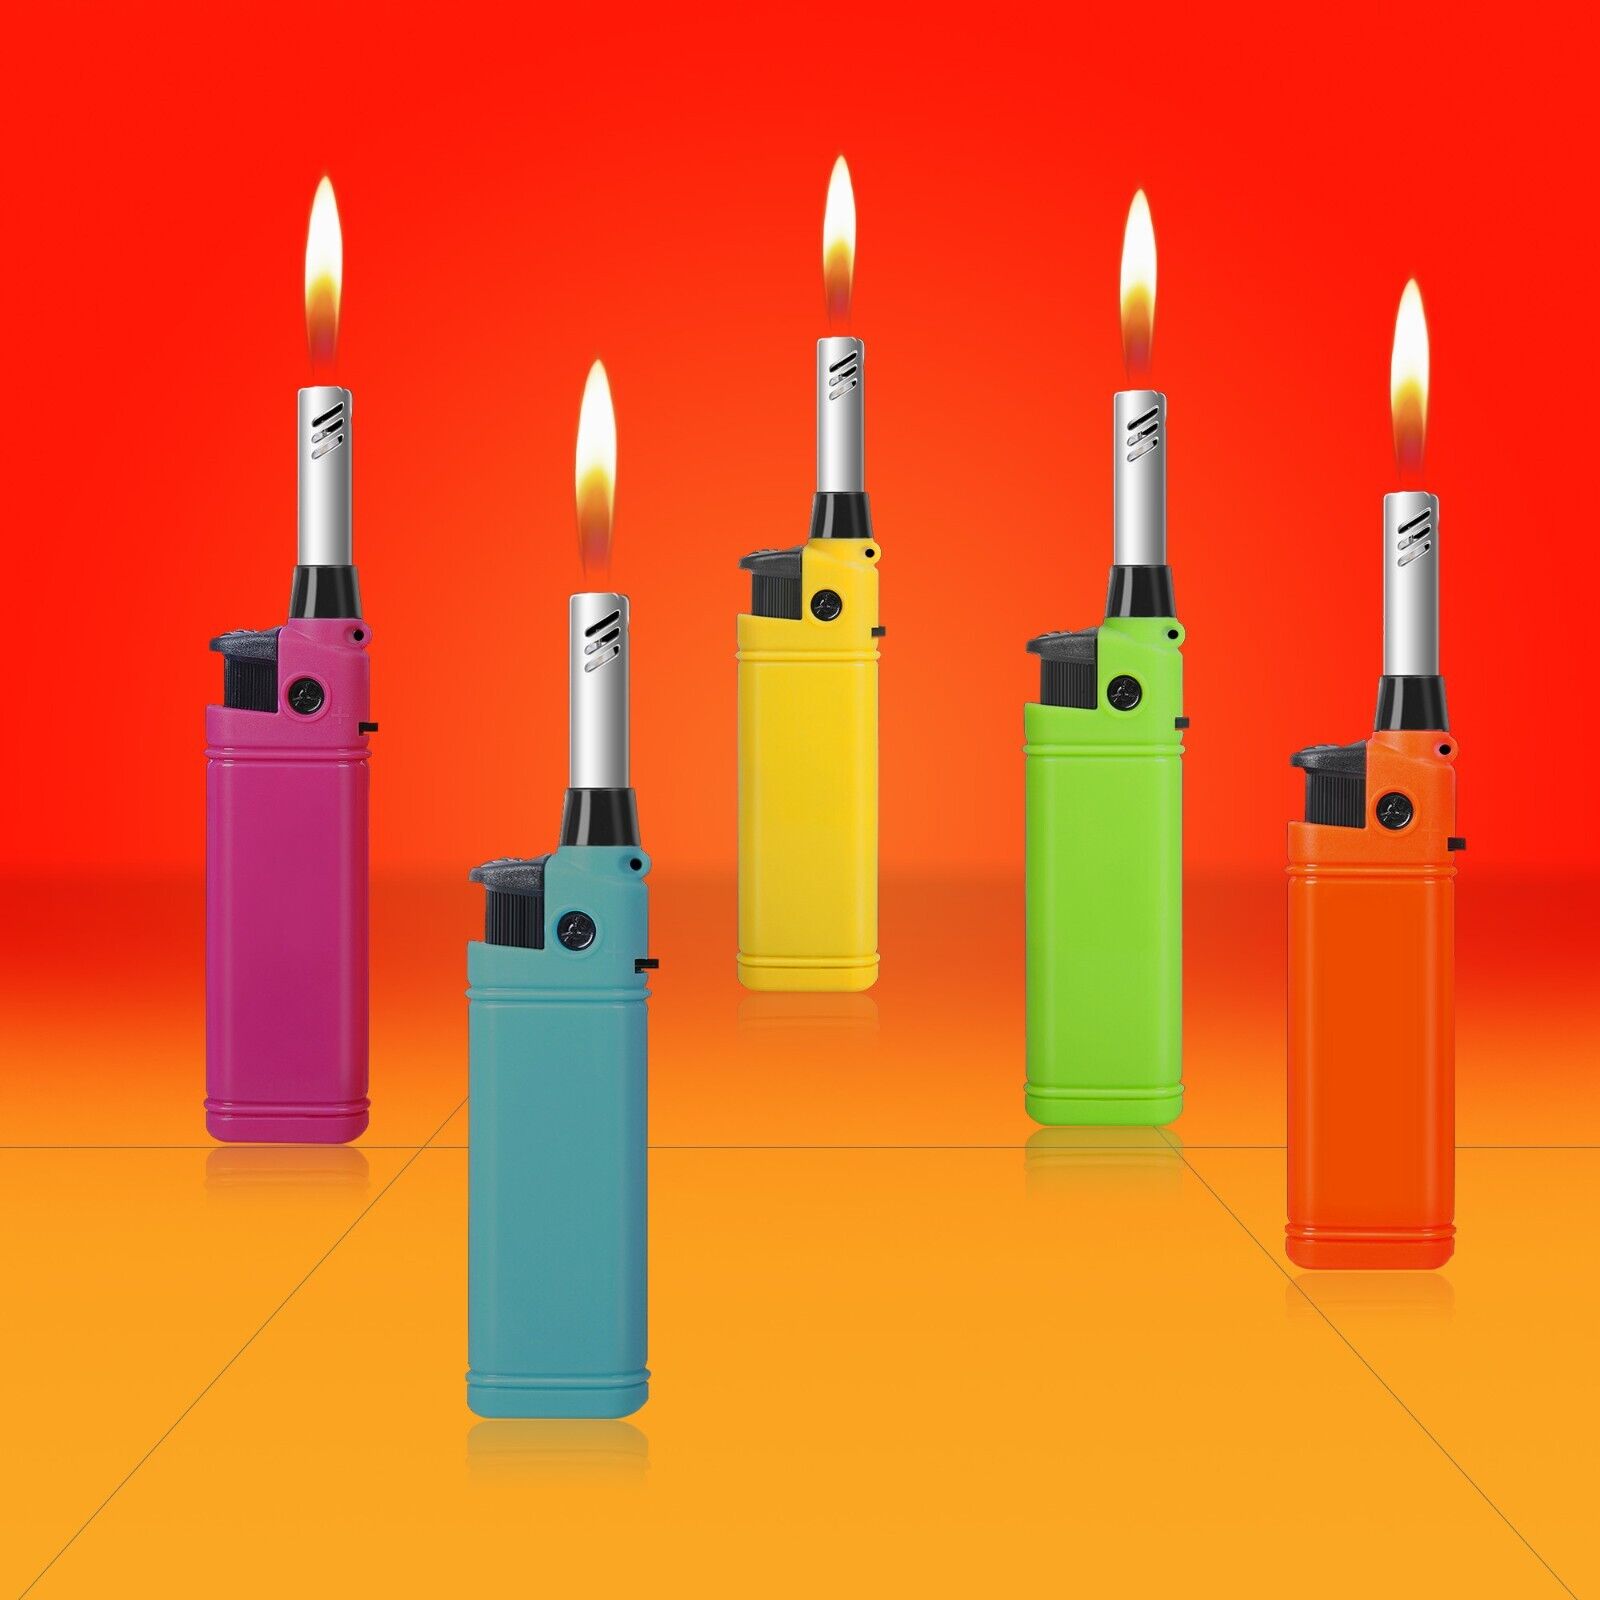 Mini Candle Lighter 5 Pack Refillable Long Neck Butane Gas Lighters for Stove Без бренда - фотография #8